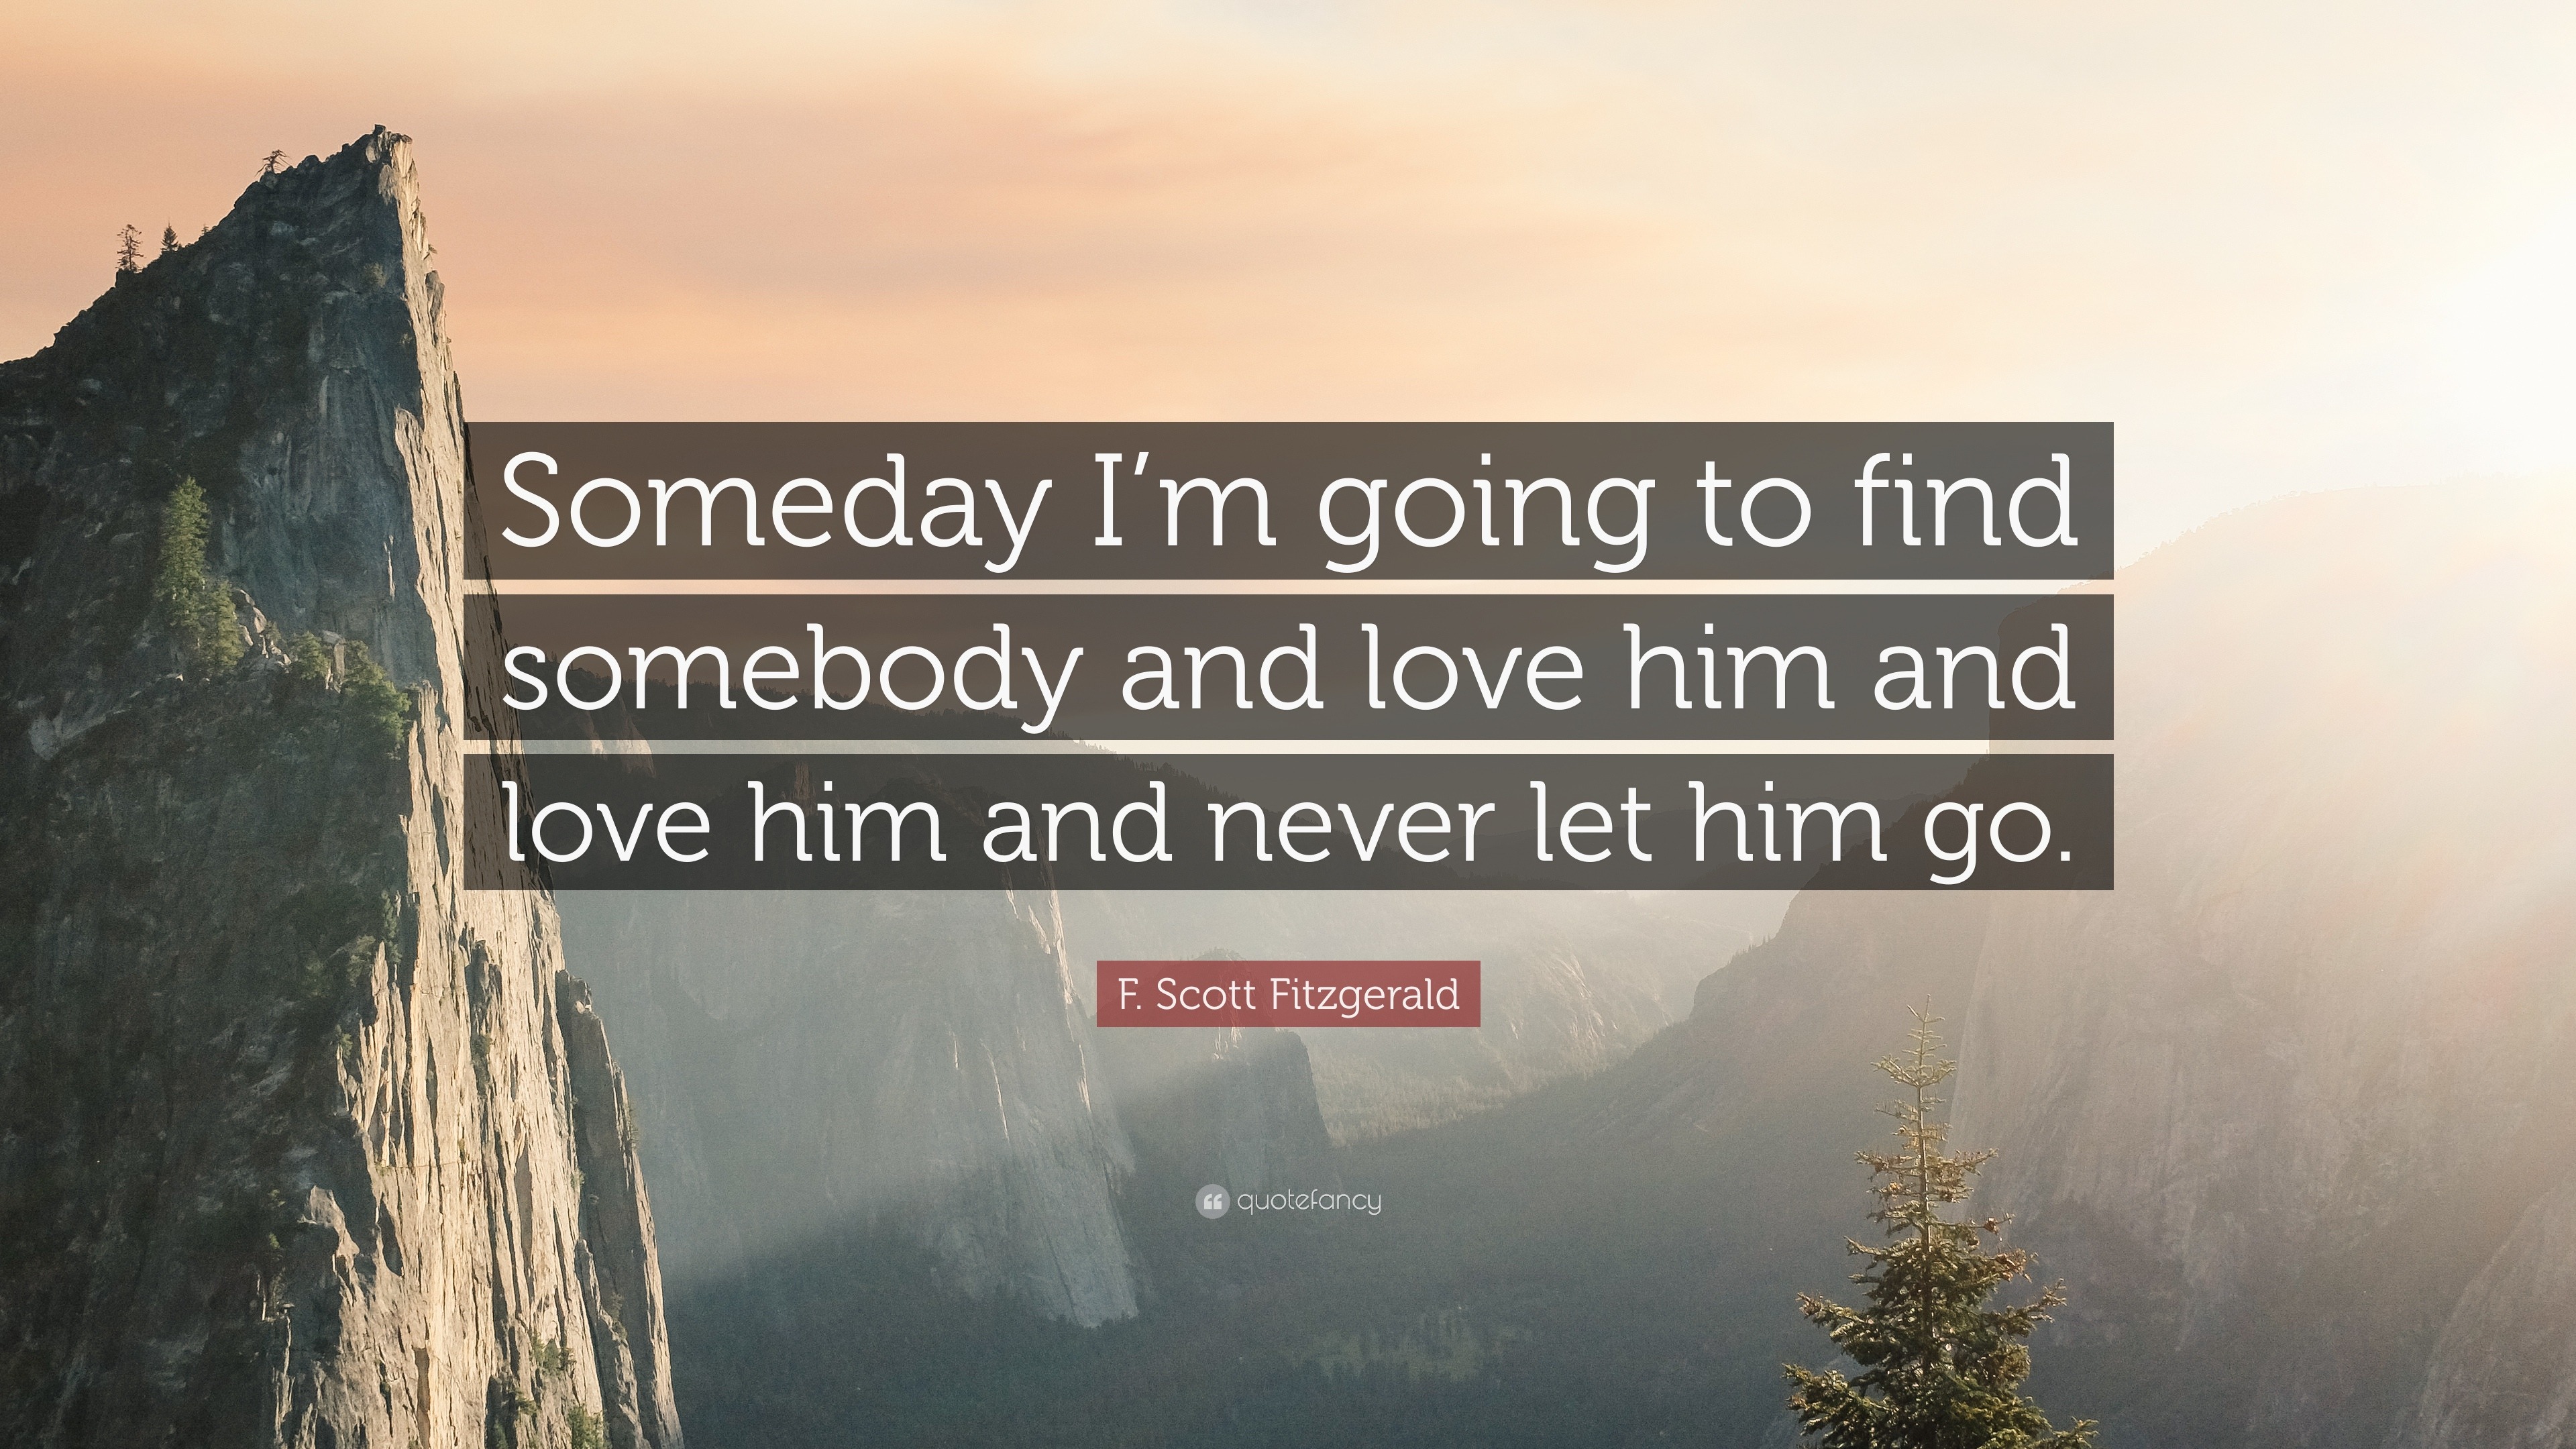 F Scott Fitzgerald Quote “Someday I m going to find somebody and